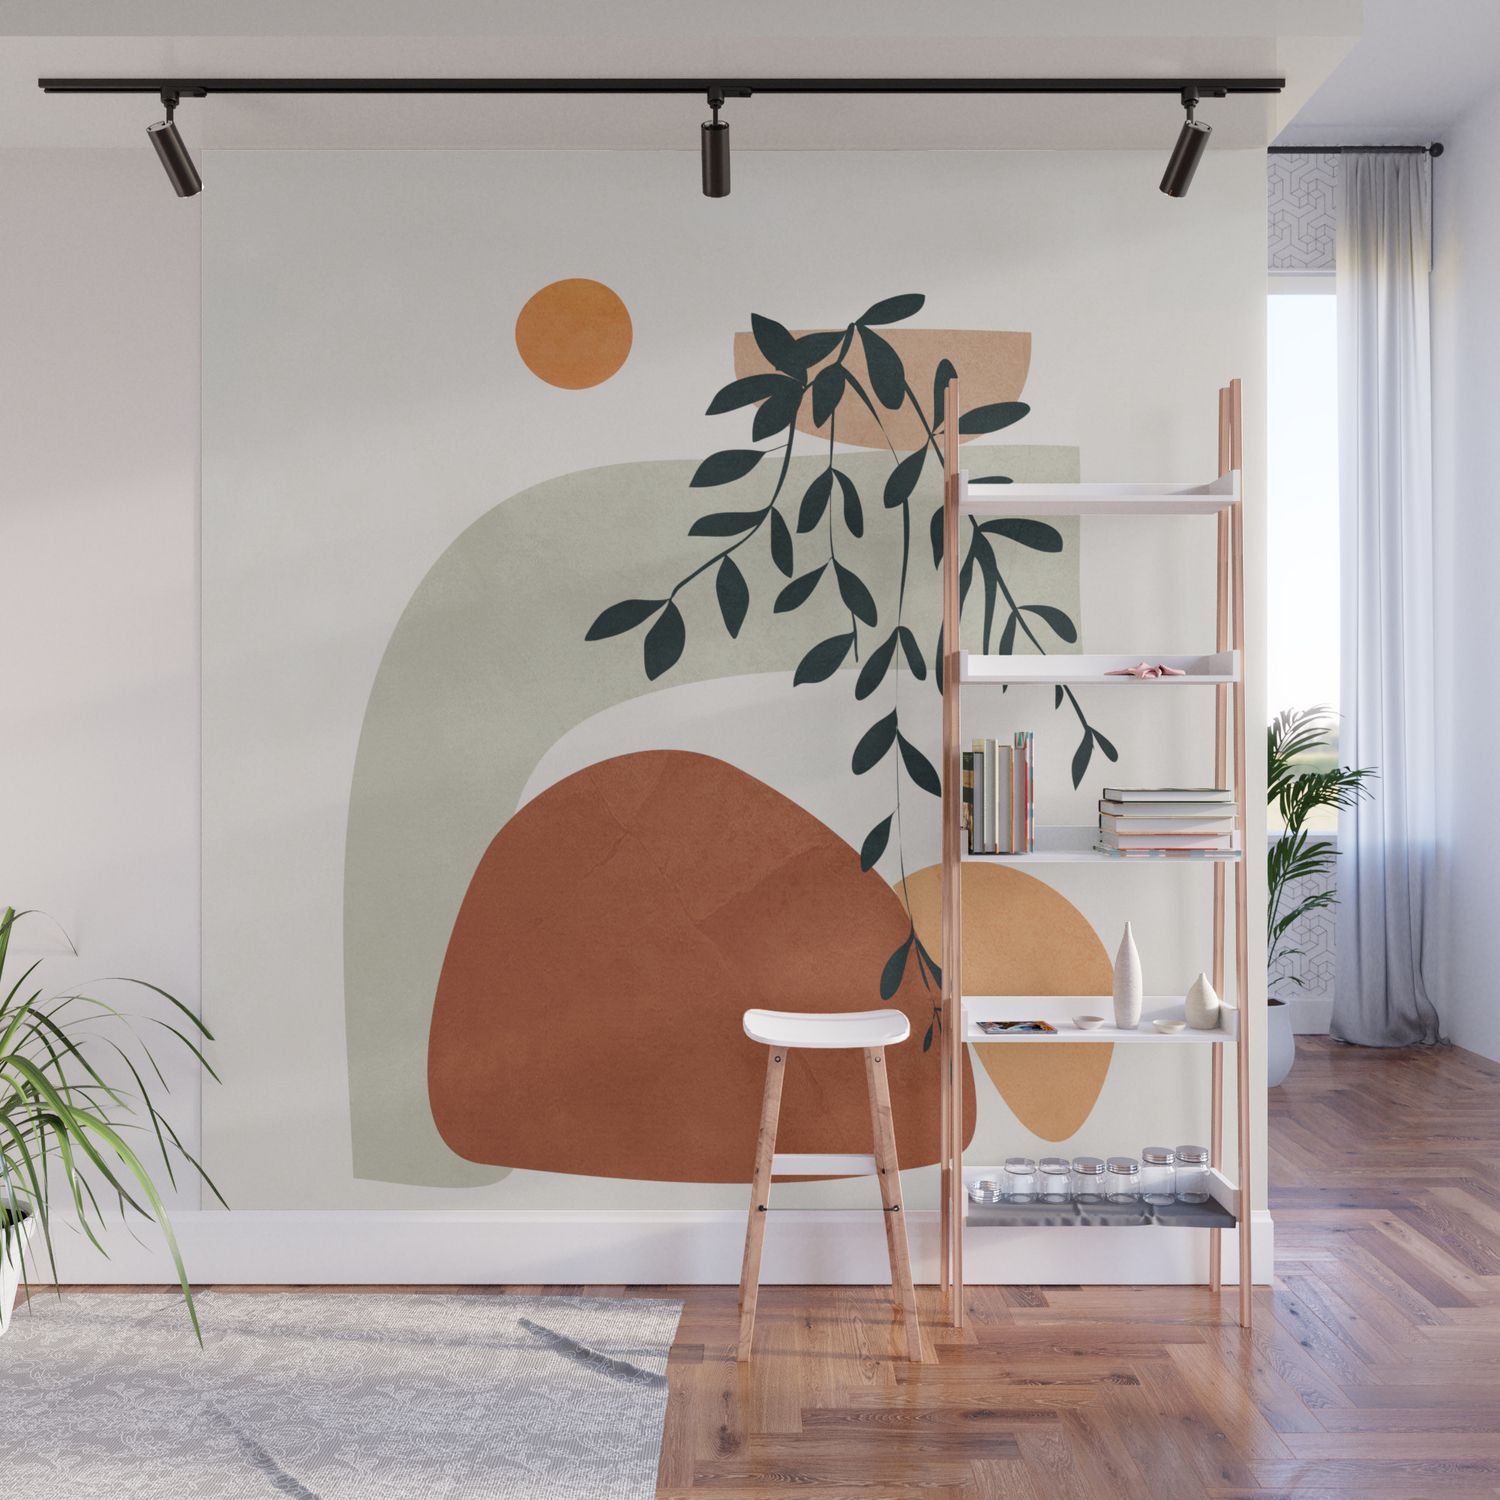 Soft Shapes I Wall Muralcity Art | Society6 With Regard To Newest Soft Shapes Wall Art (View 9 of 20)